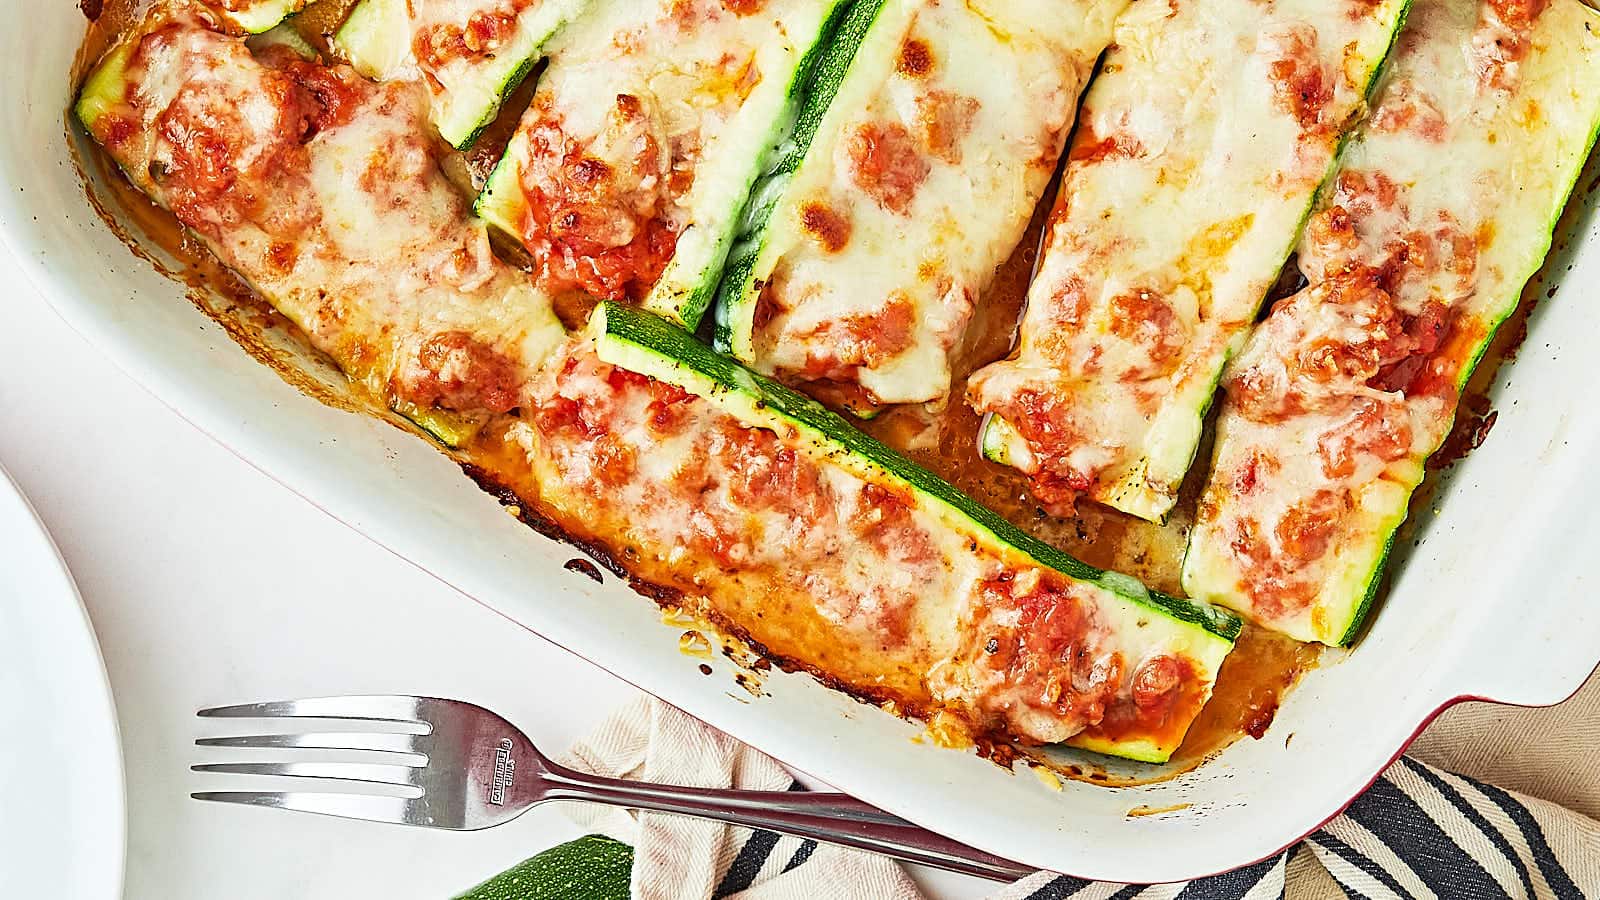 Zucchini Boats recipe by Cheerful Cook.